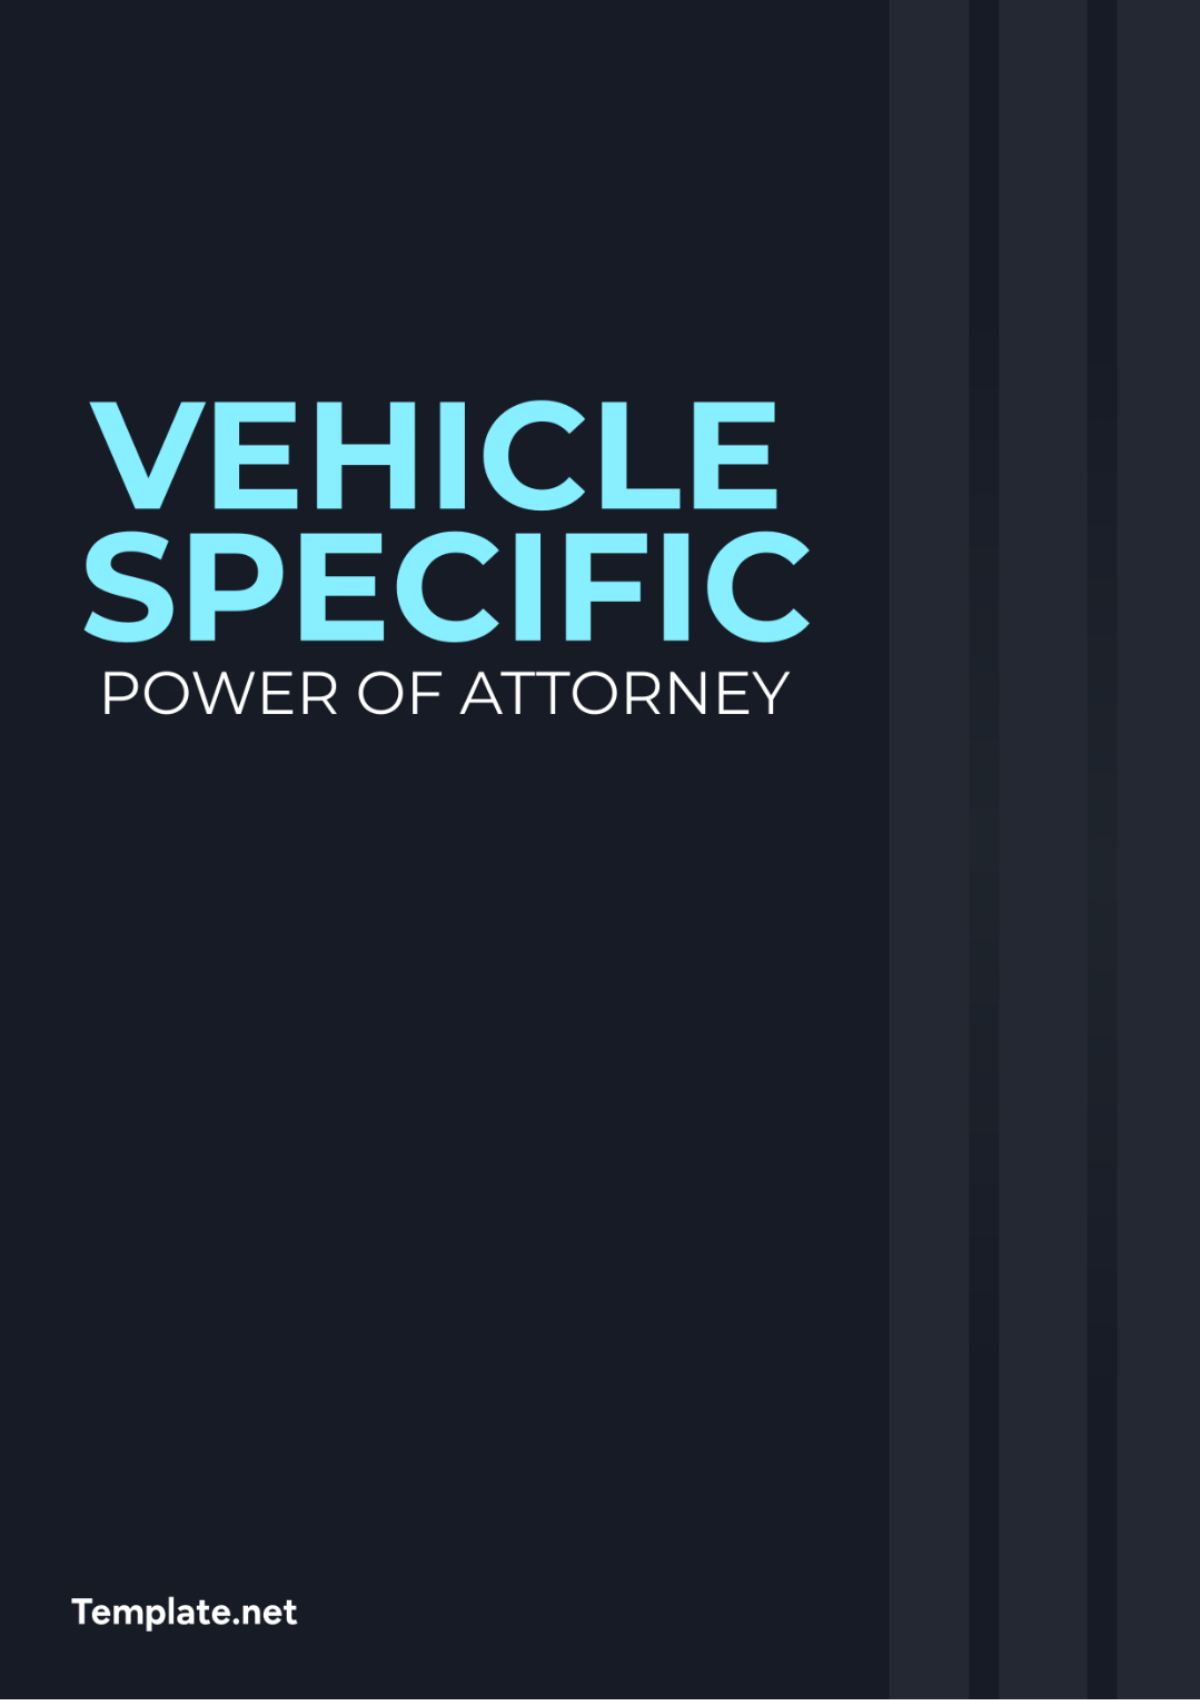 Vehicle Specific Power of Attorney Template